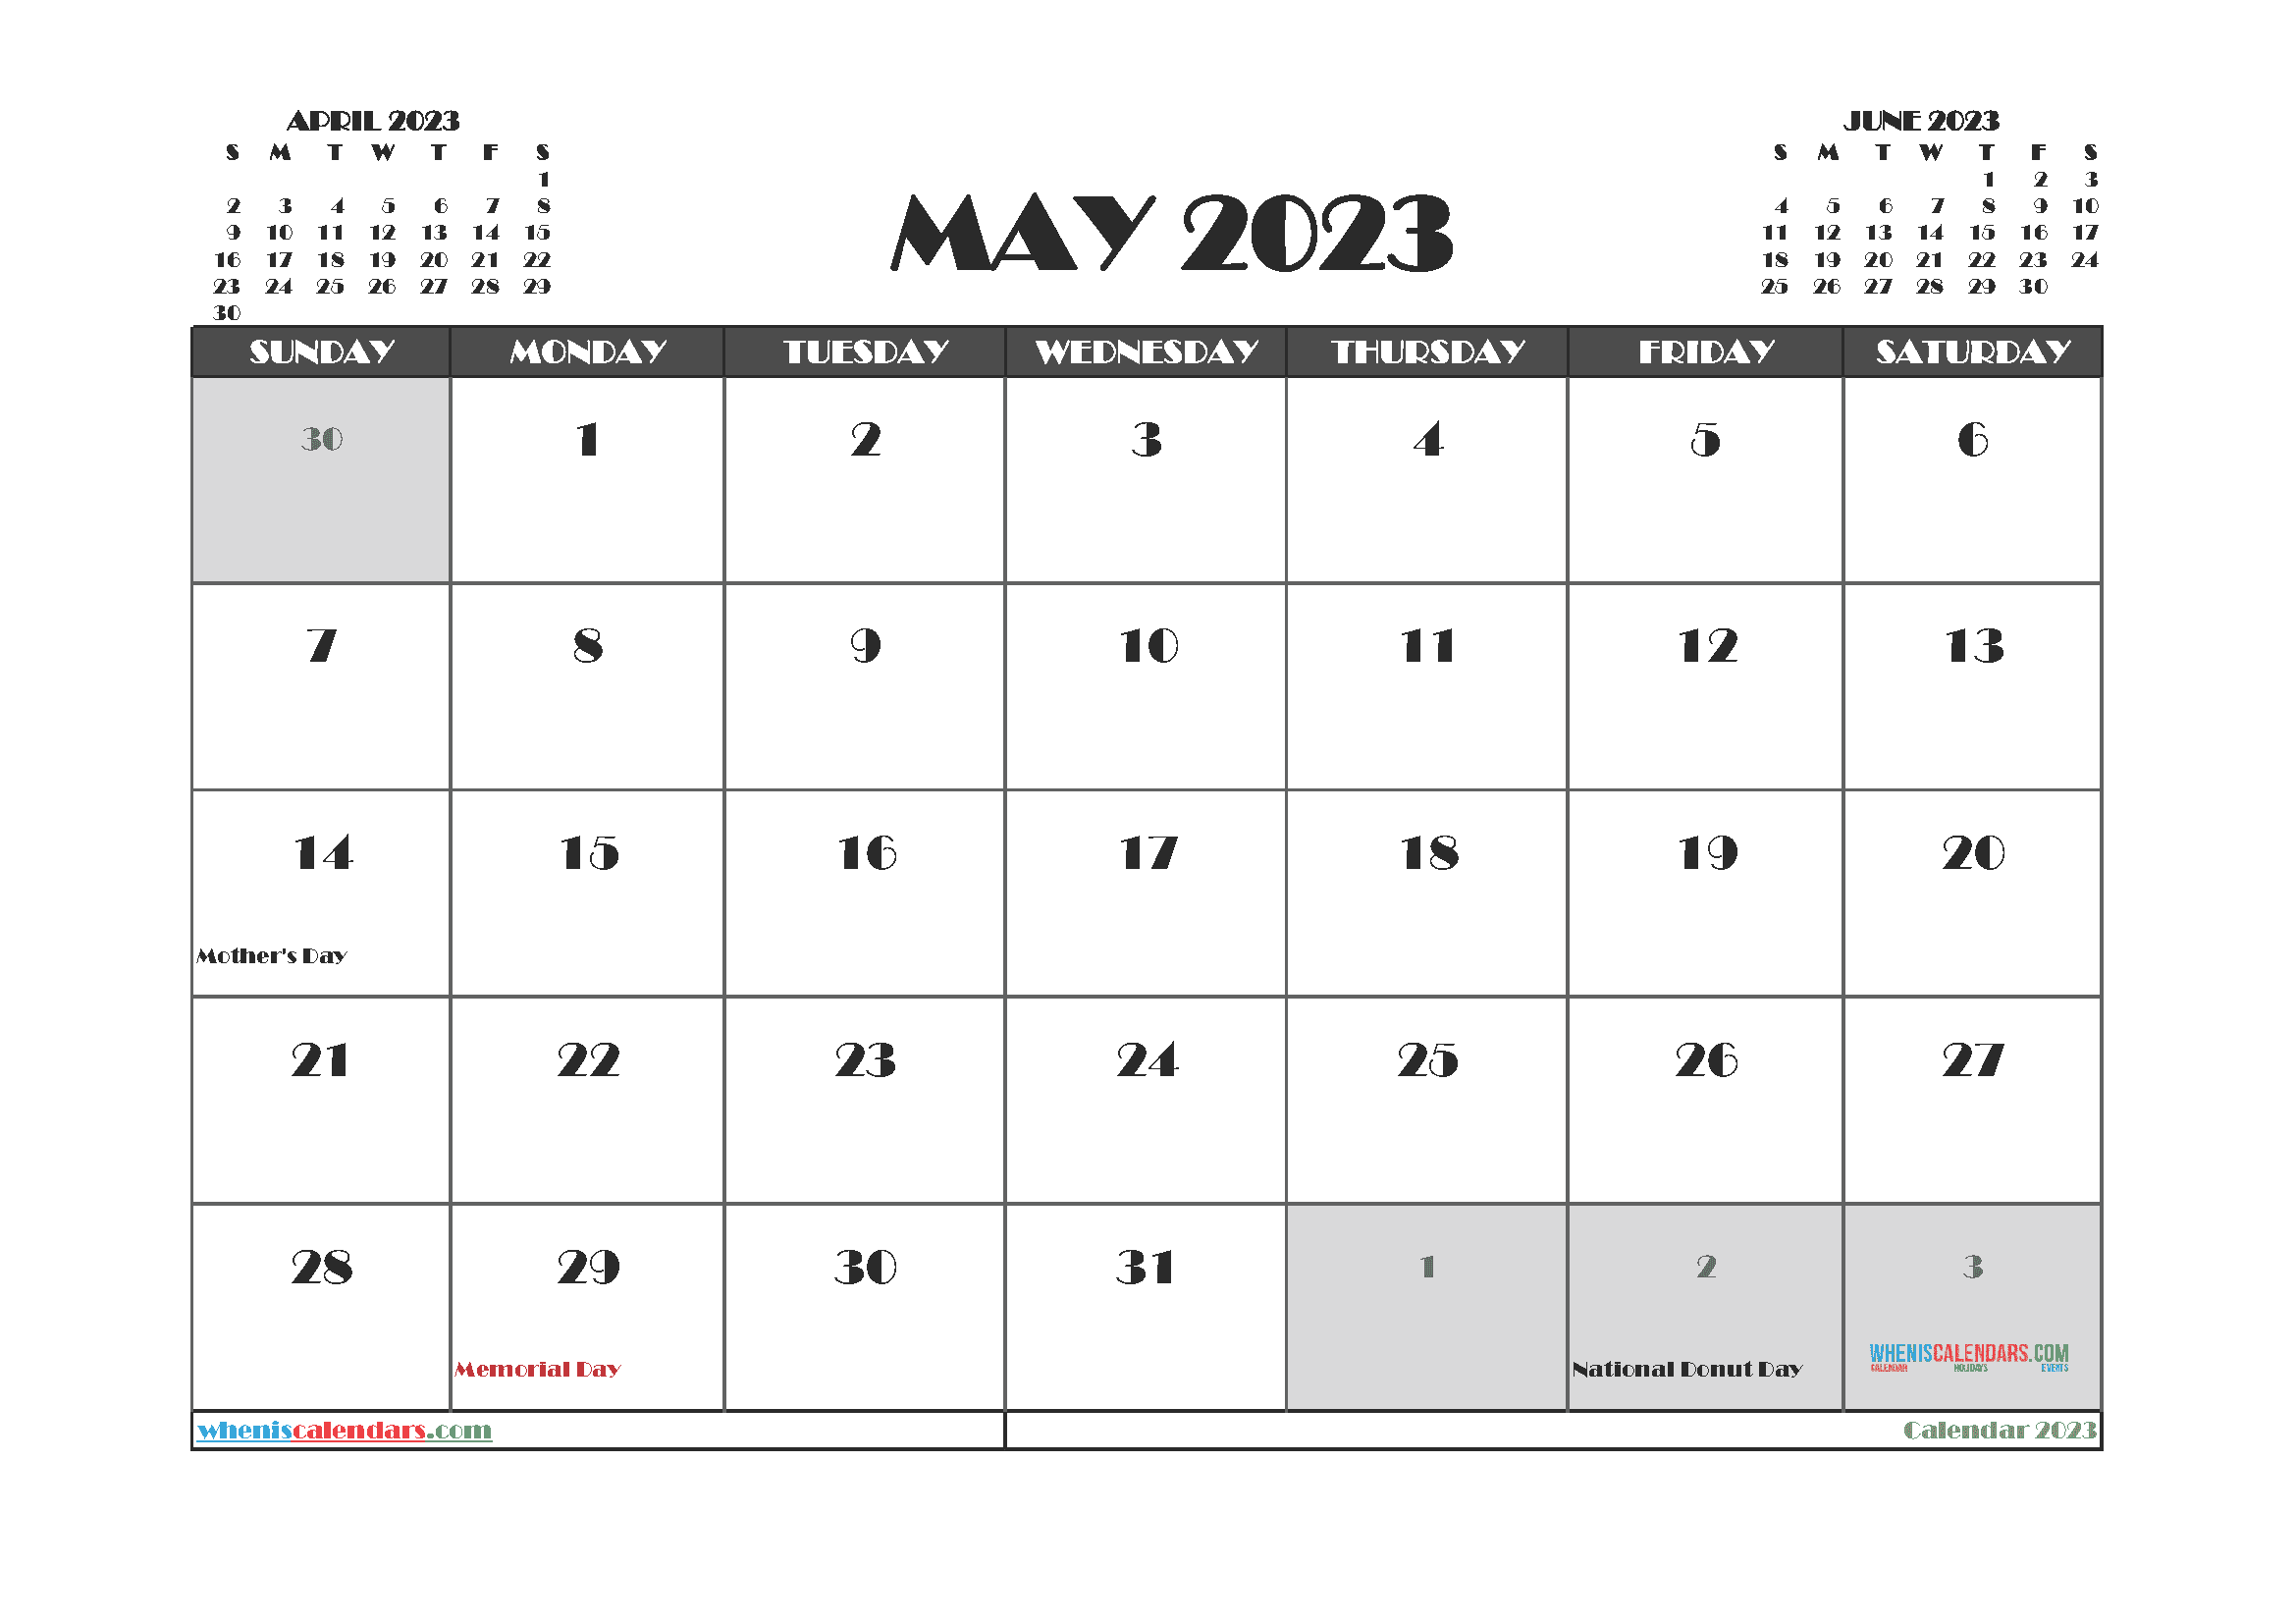 May 2023 Calendar with Holidays Free Printable PDF in Landscape